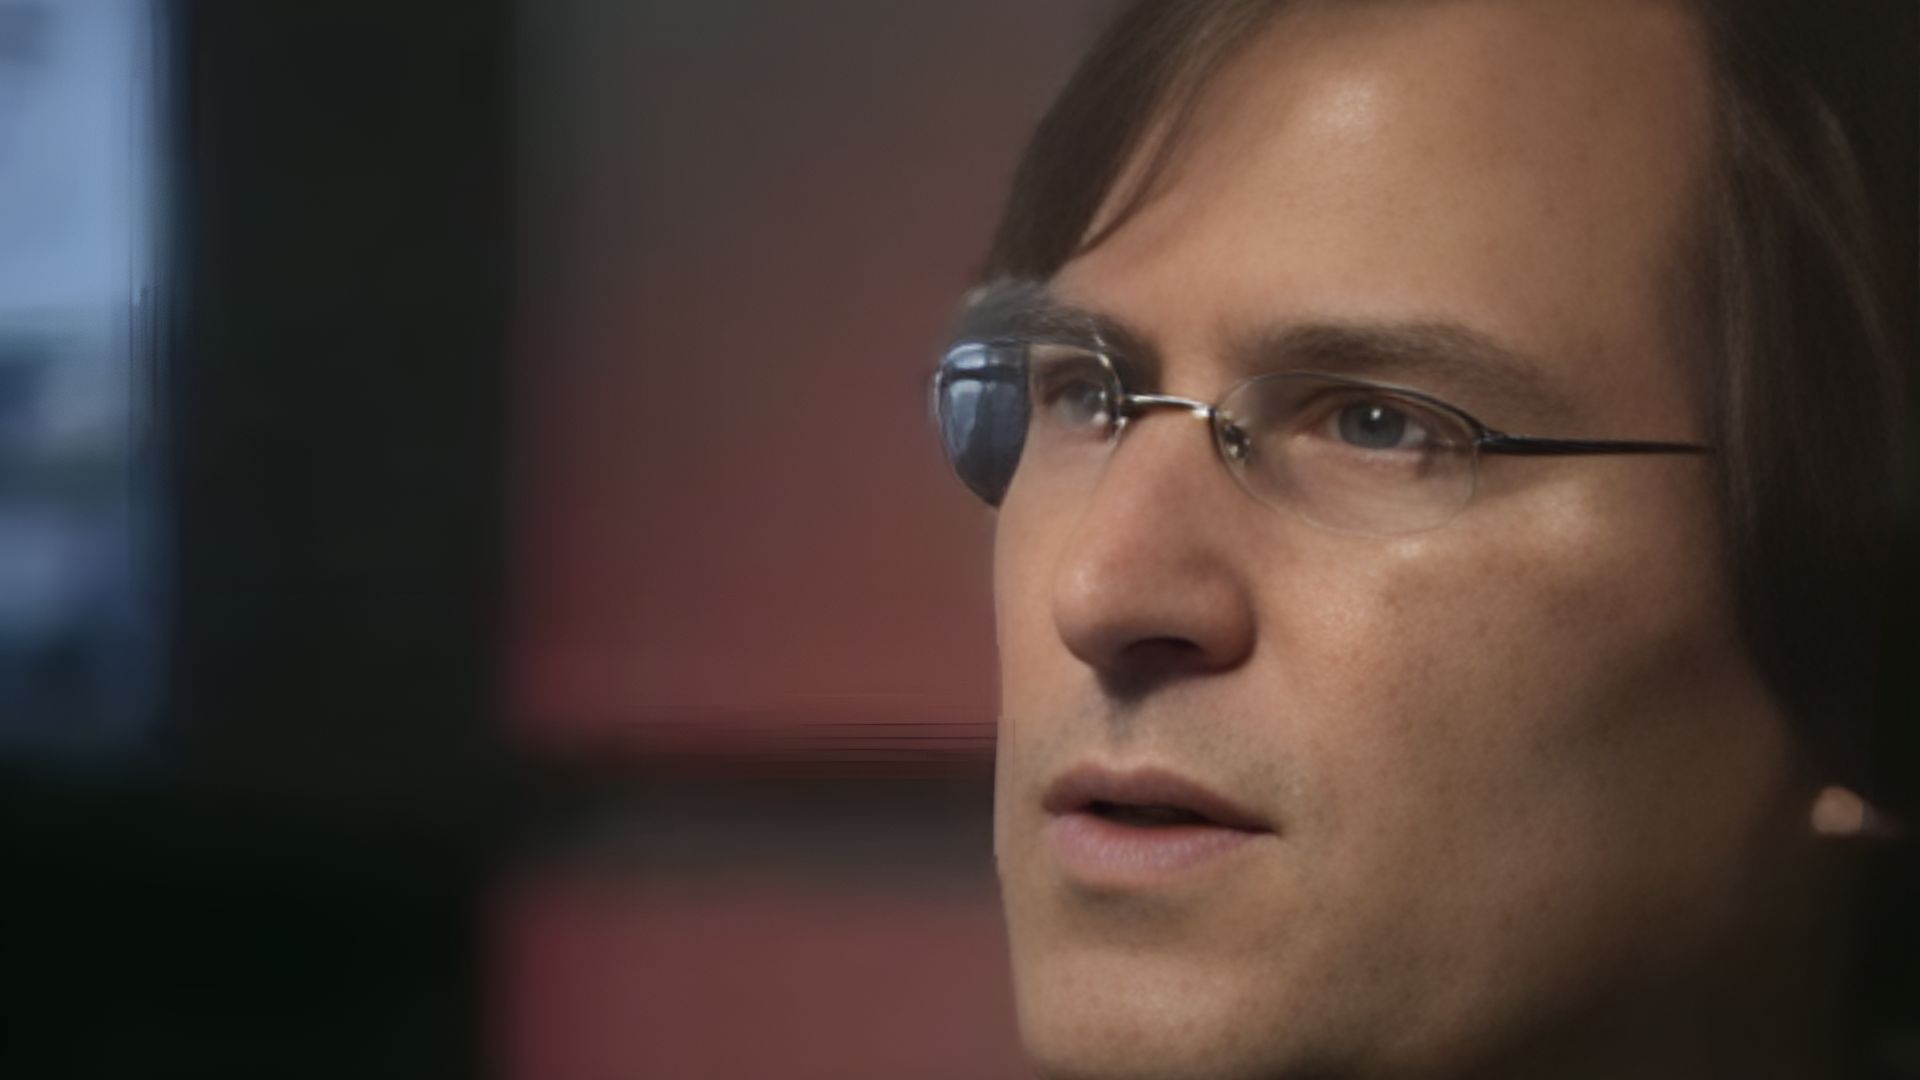 Steve Jobs’ Old Video Criticizing Microsoft Goes Viral Amid Outage: ‘Third-Rate Products’